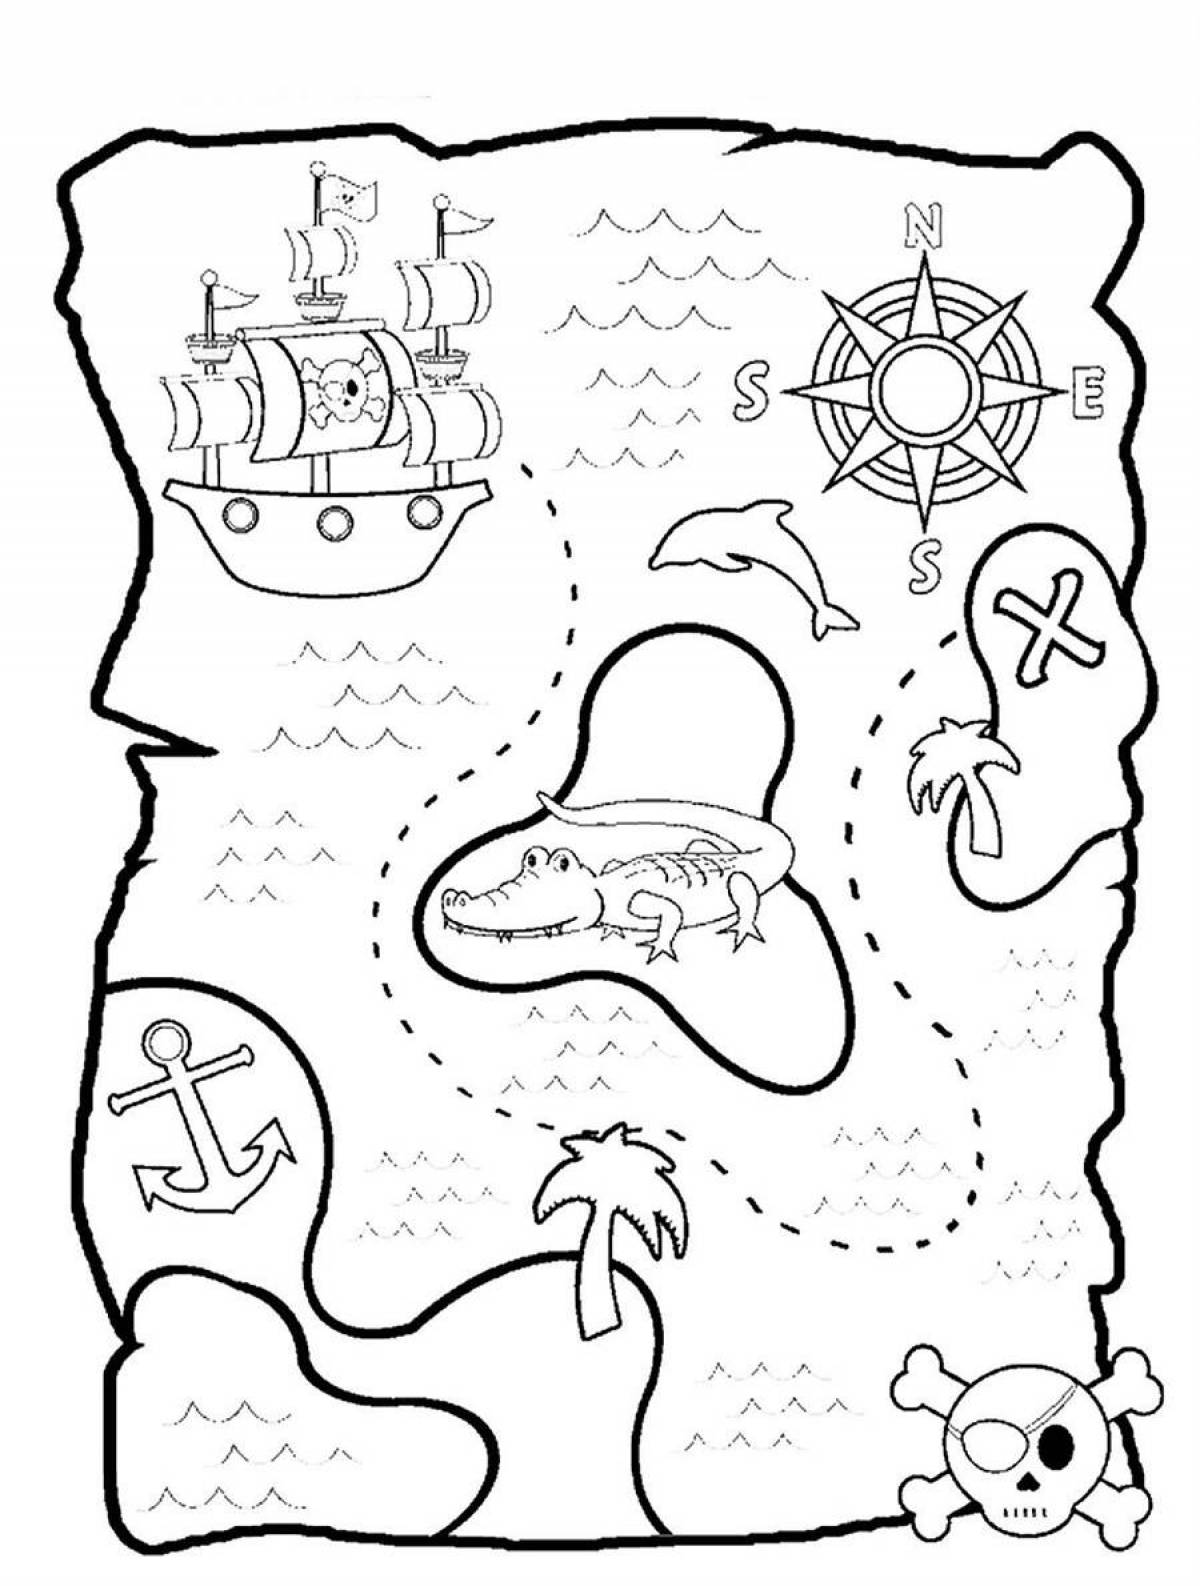 Shining map coloring page